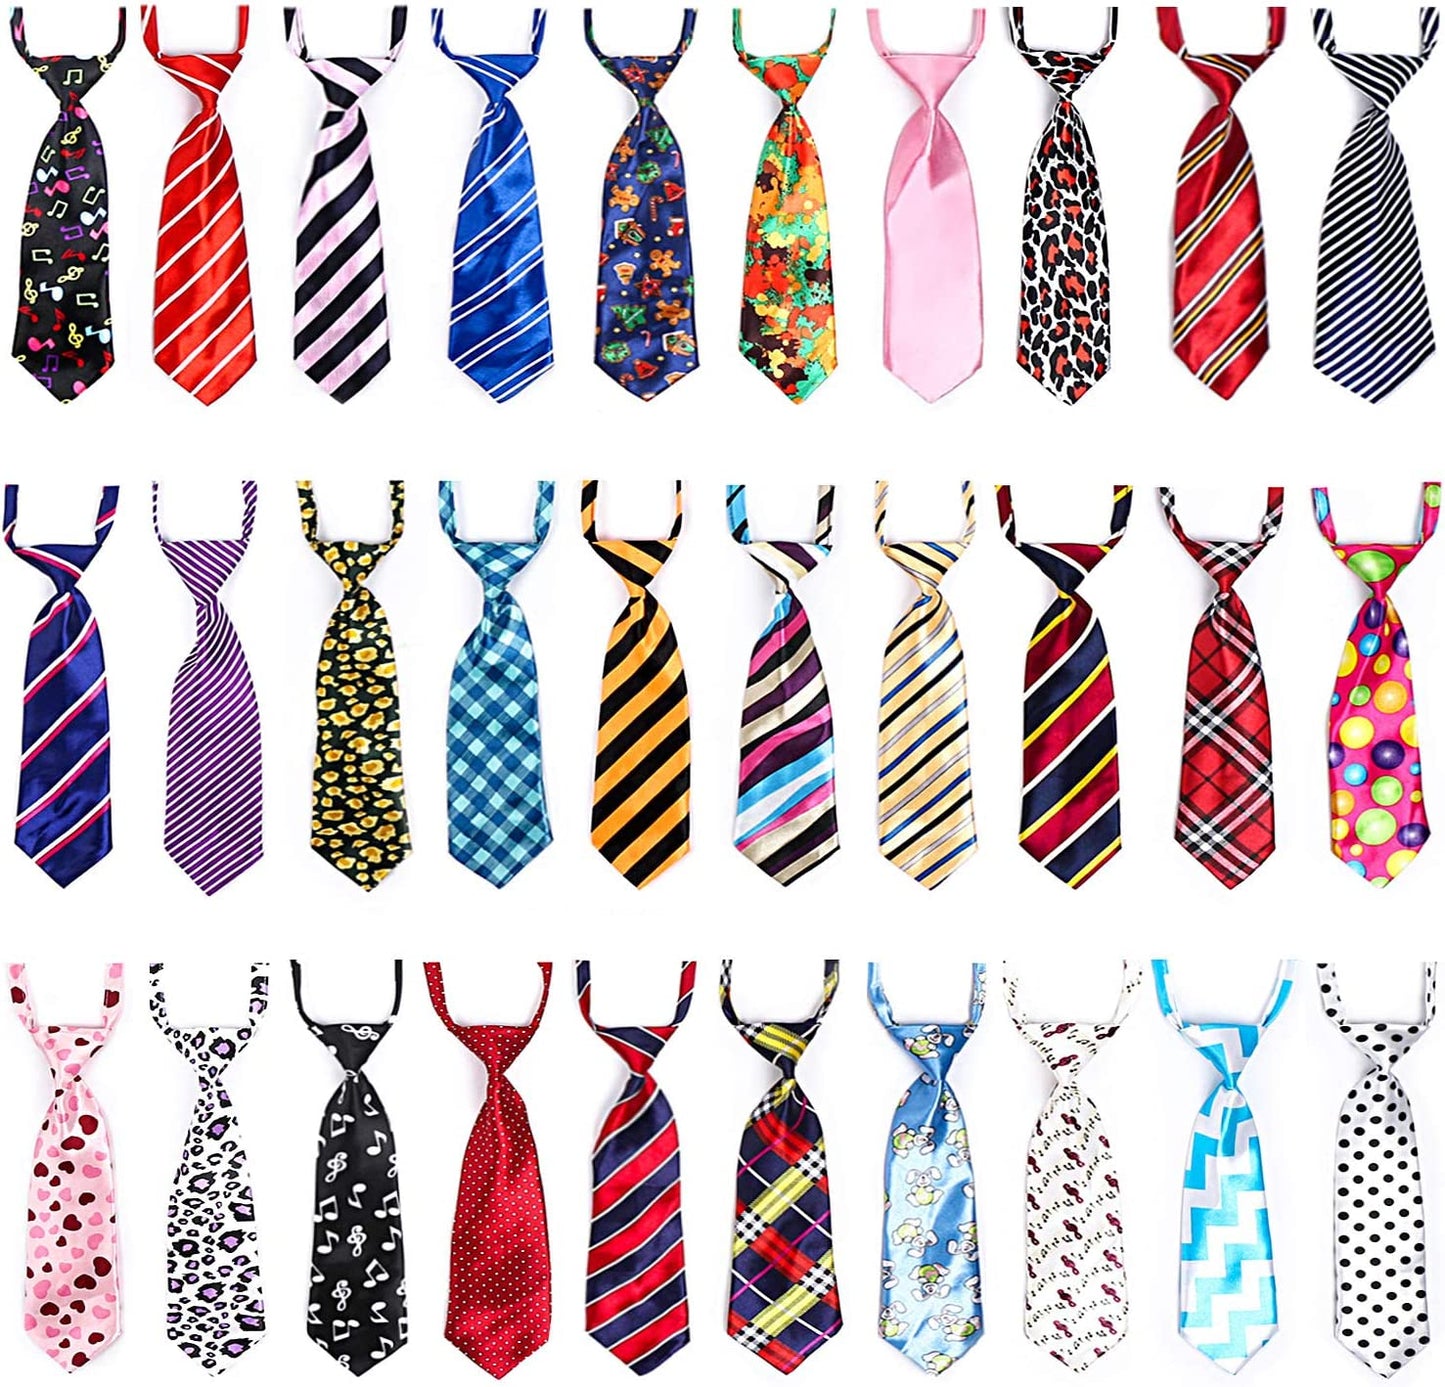 Segarty Dog Ties 30 PCS Dog Neckties, Adjustable Dog Neck Ties and Bows for Medium Large Dog Festival Formal Bulk Pet Bowties Collar Grooming Dogs Accessories Holiday Birthday Wedding Costumes Animals & Pet Supplies > Pet Supplies > Dog Supplies > Dog Apparel Segarty 30PCS, Multi-Colored A  